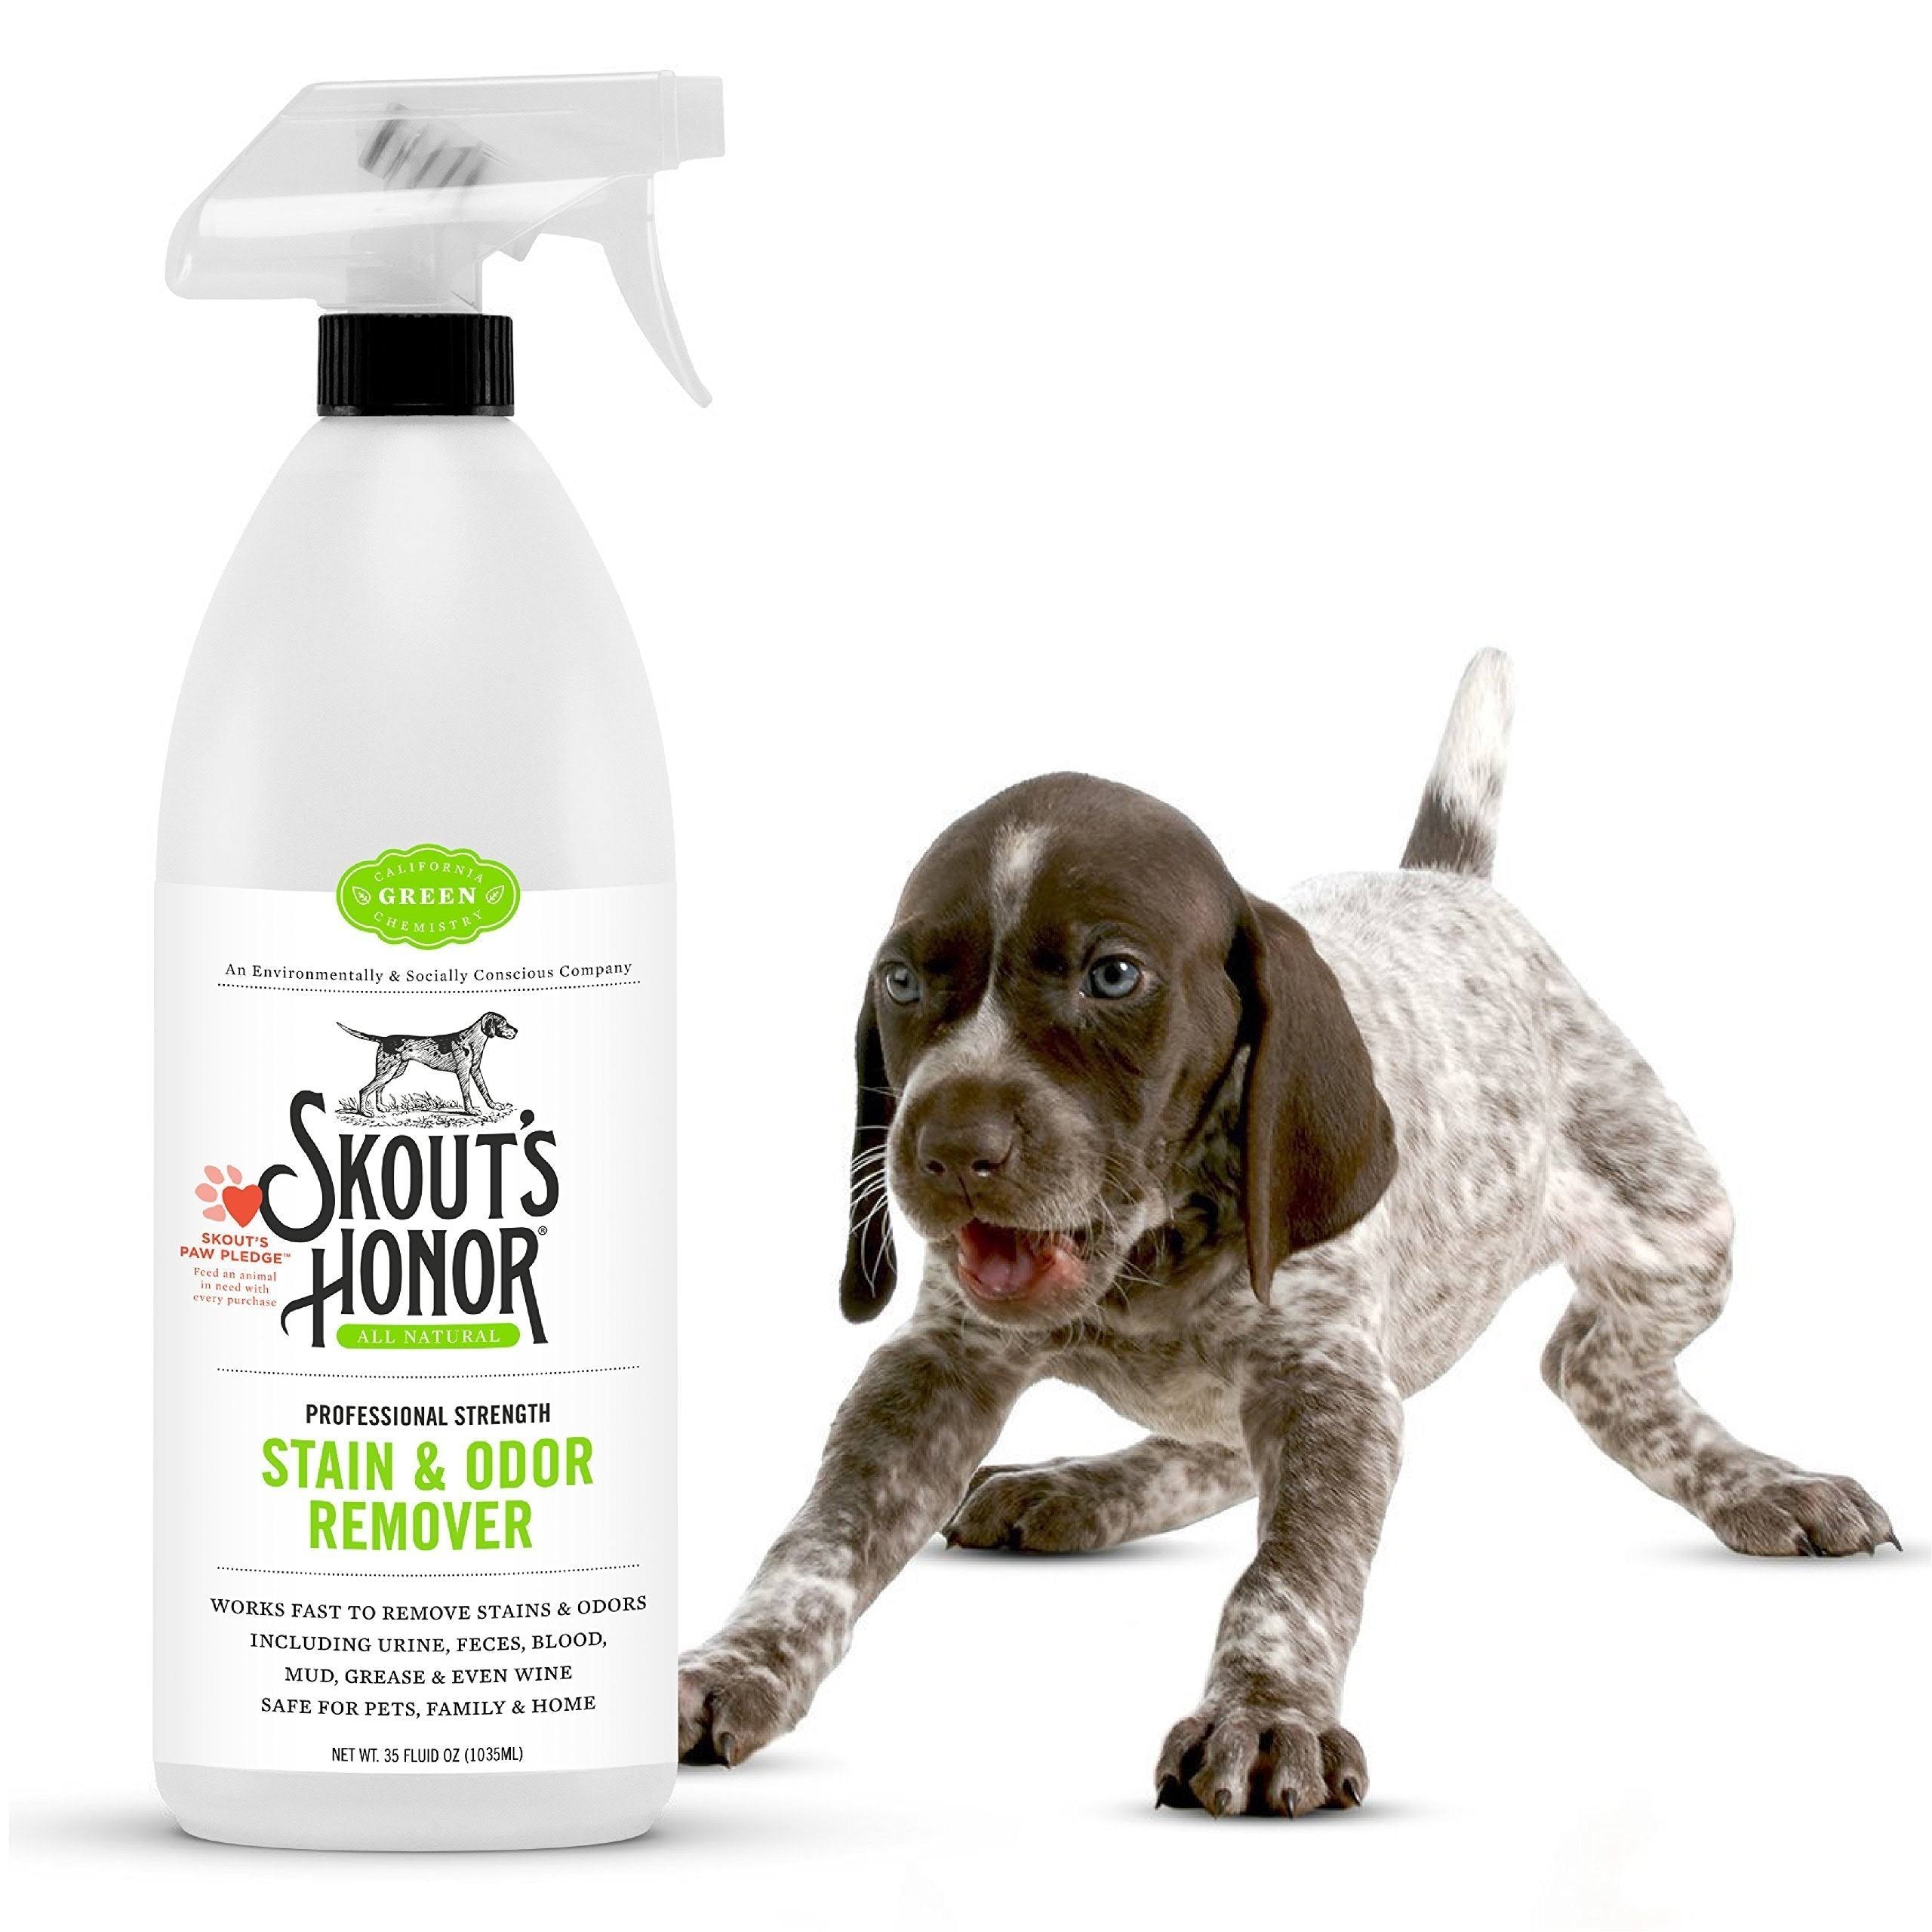 Skout's Honor Stain and Odor Remover size: 35